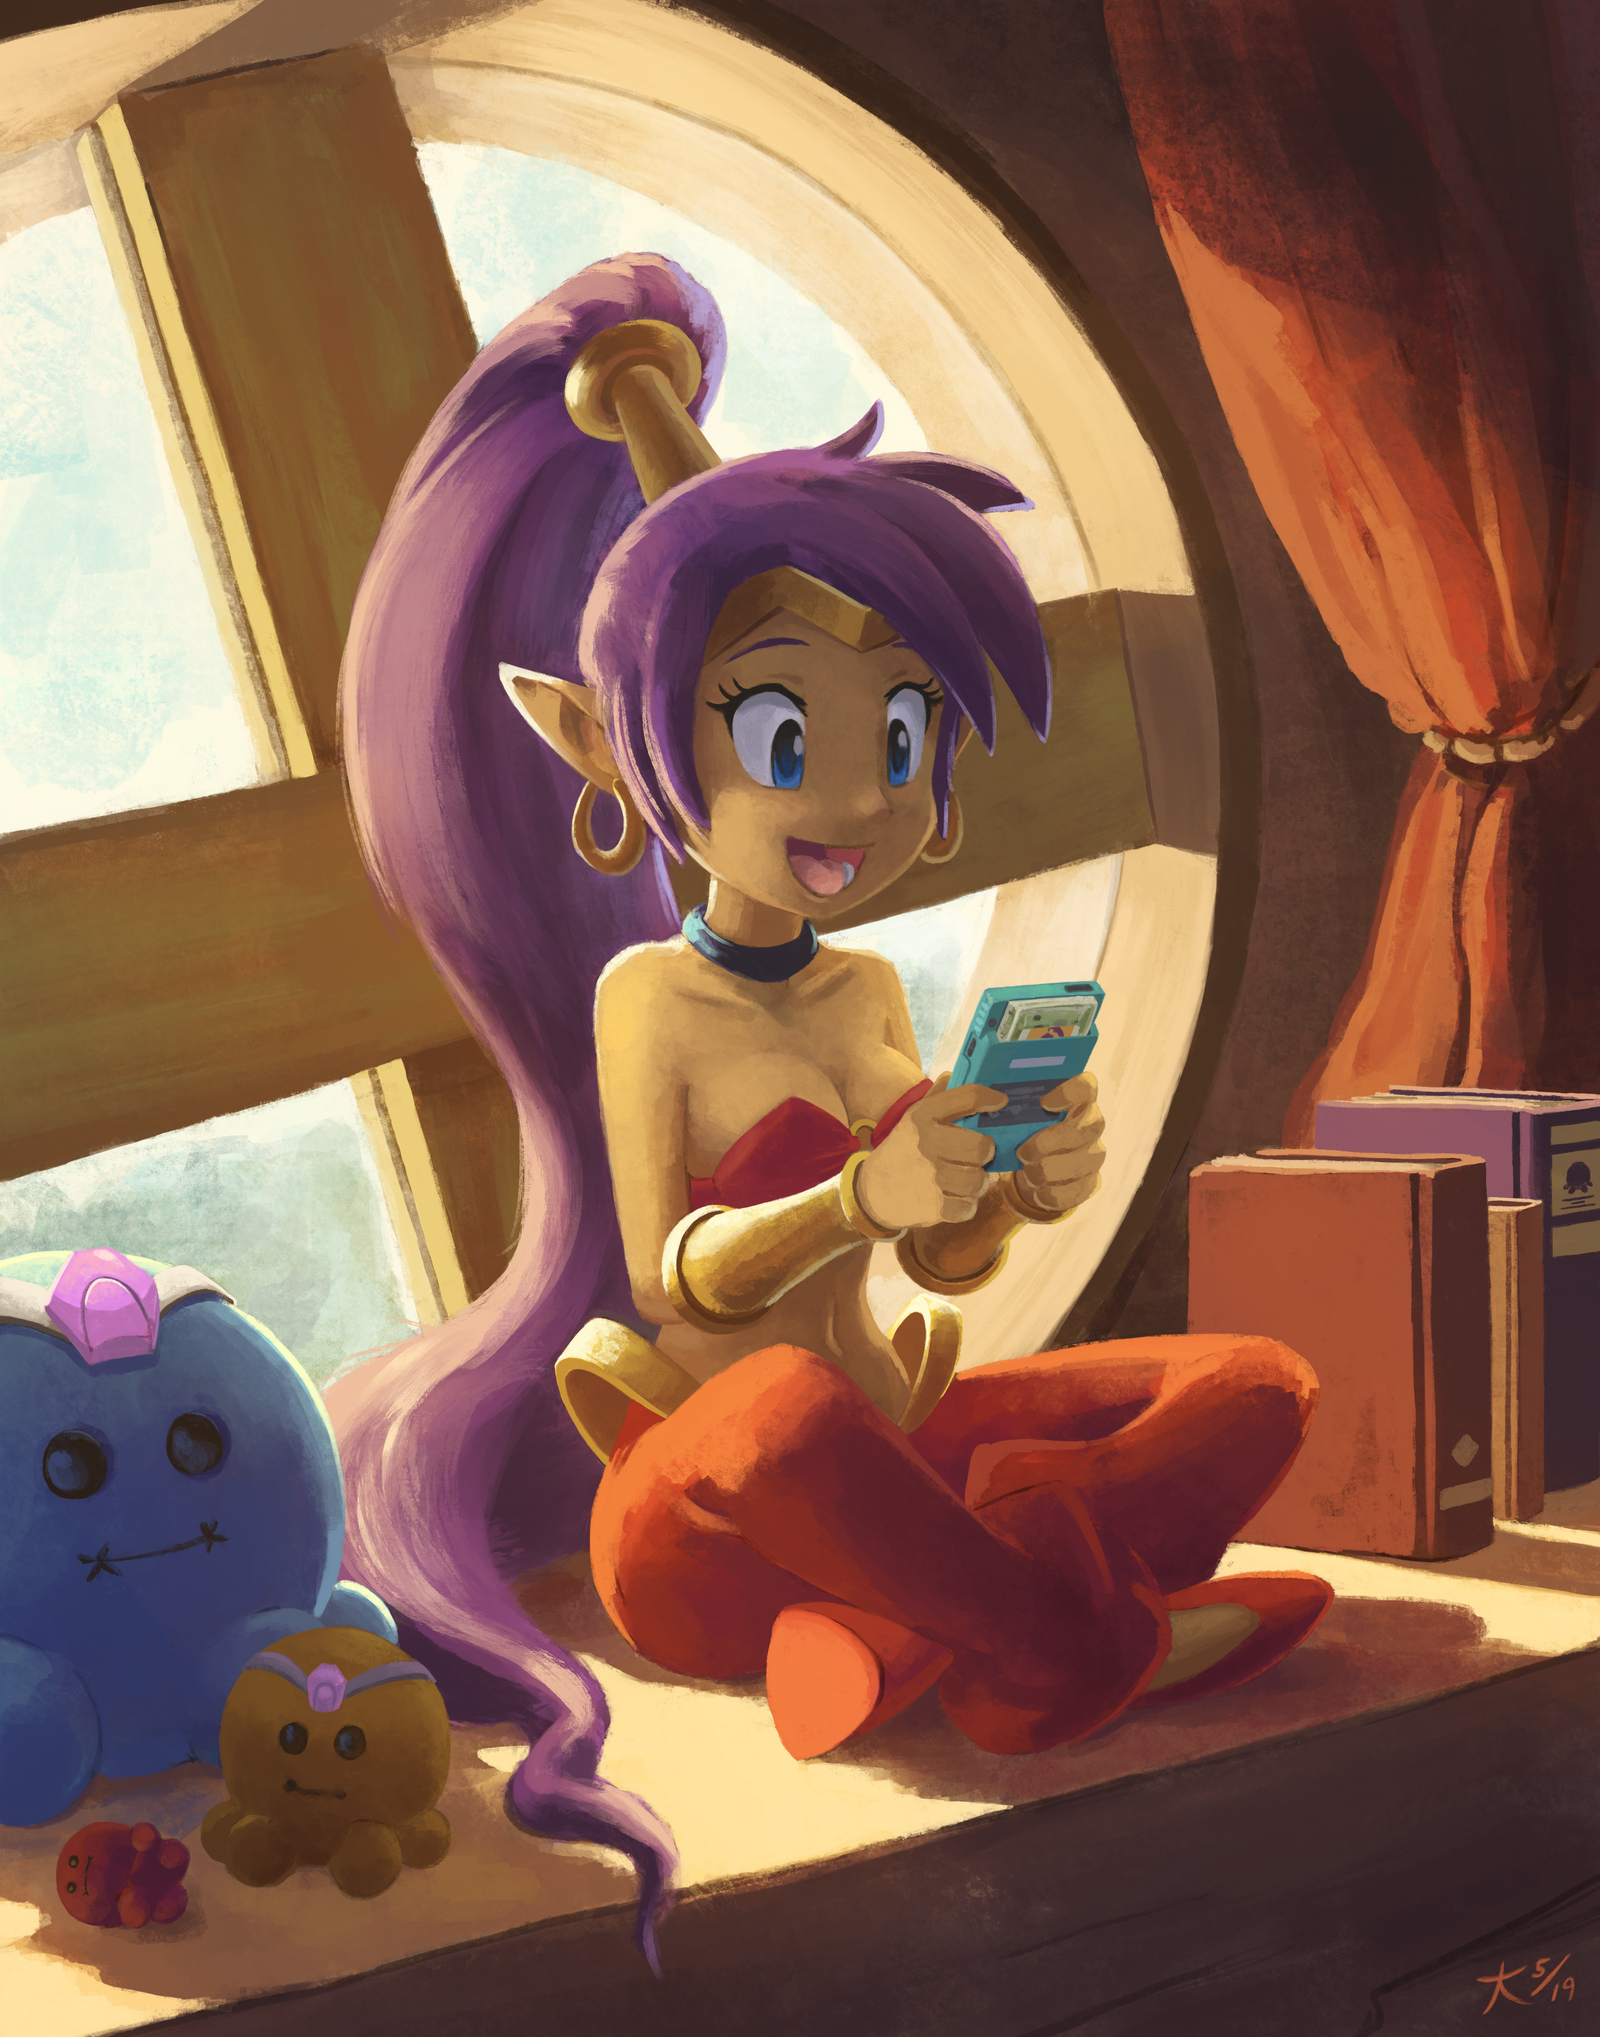 [Image: shantae_revisits_her_past_by_deannart_dd...9Q20yy9Jtk]